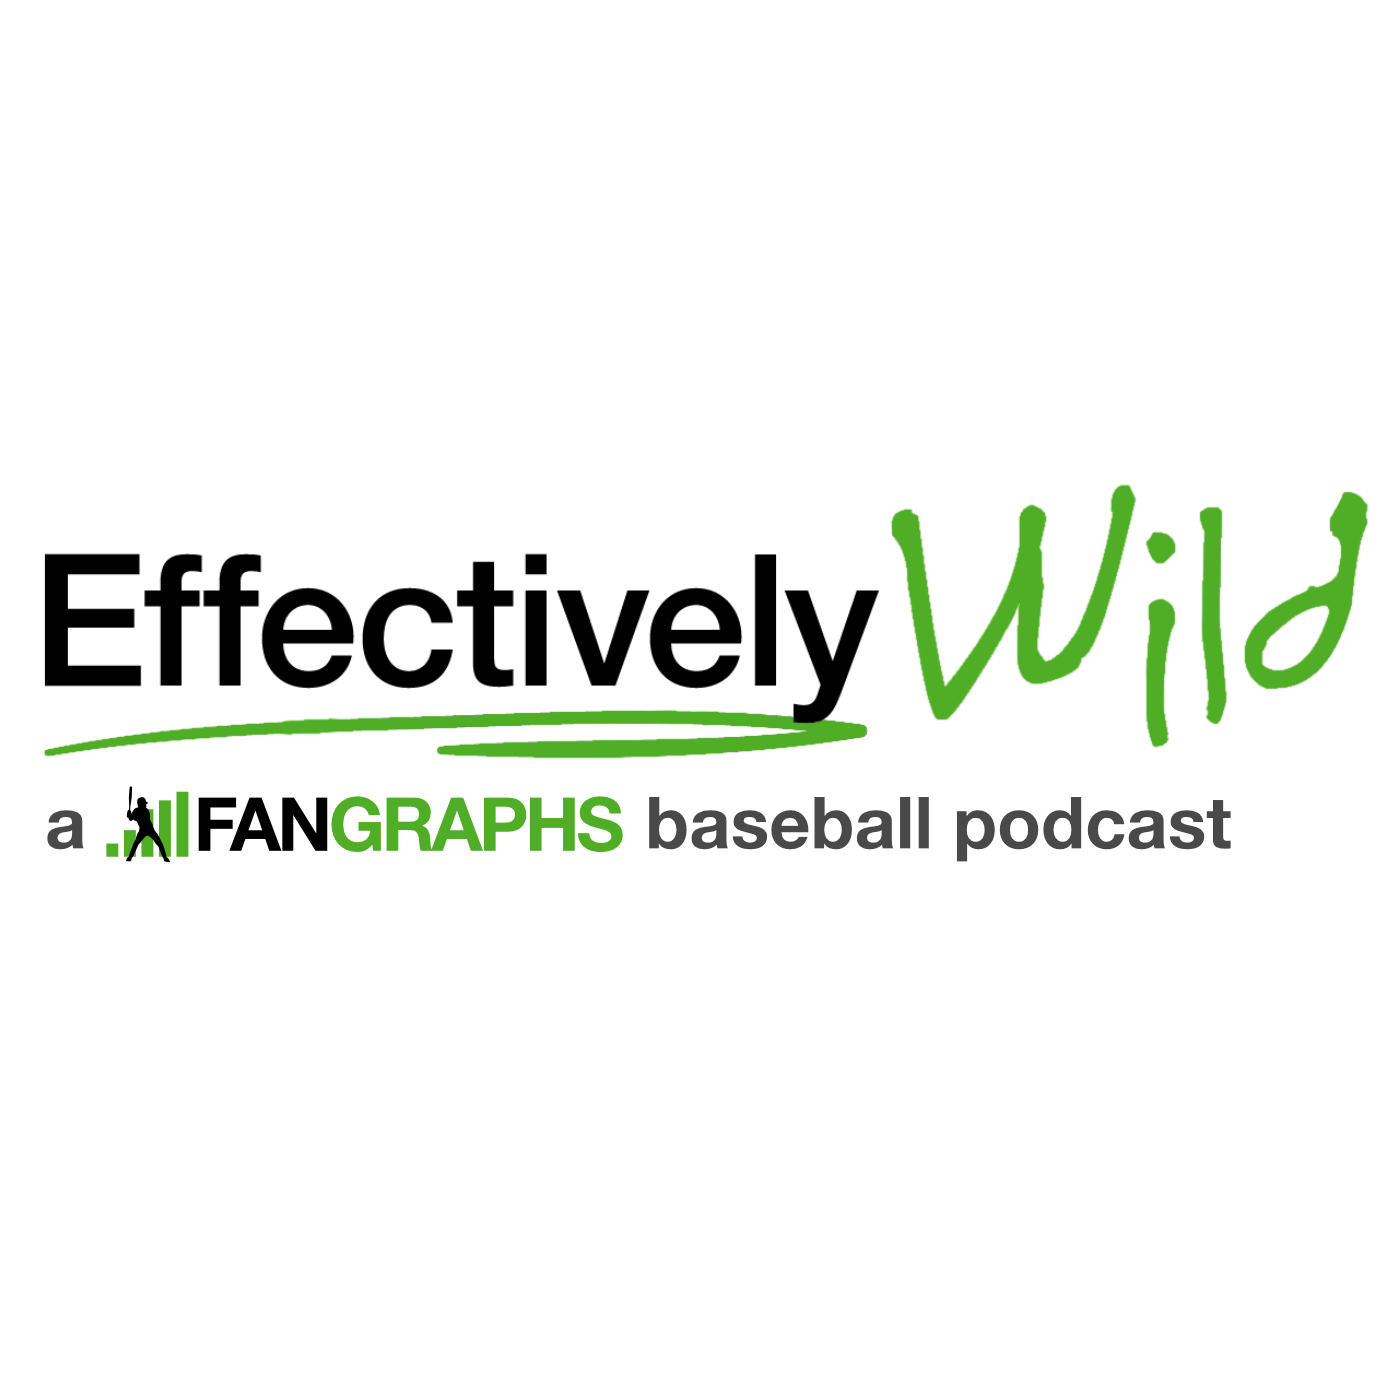 A highlight from Effectively Wild Episode 2002: East Coast MLBias